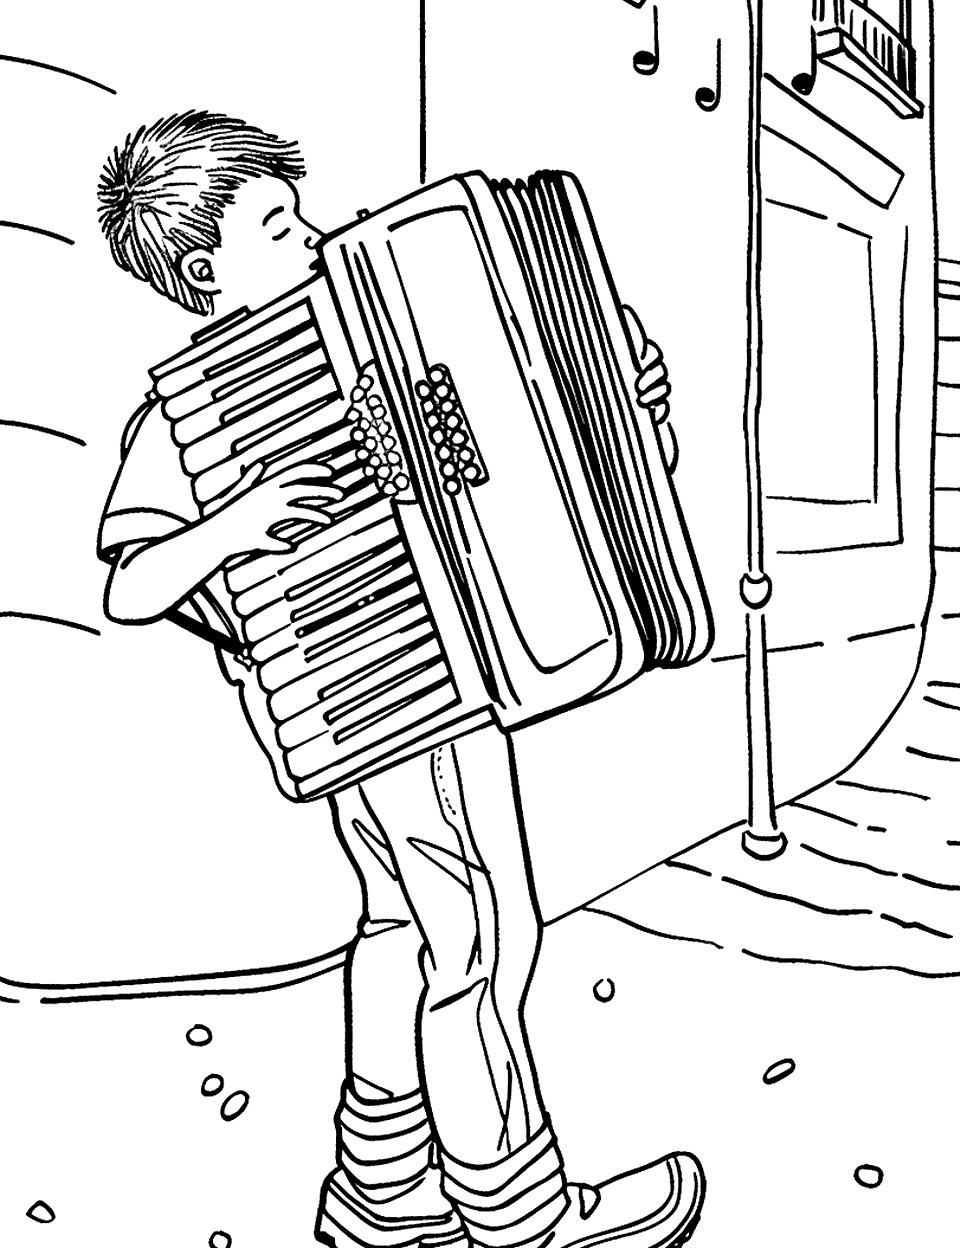 Street Musician in Paris Music Coloring Page - A boy playing the accordion on a Paris street.